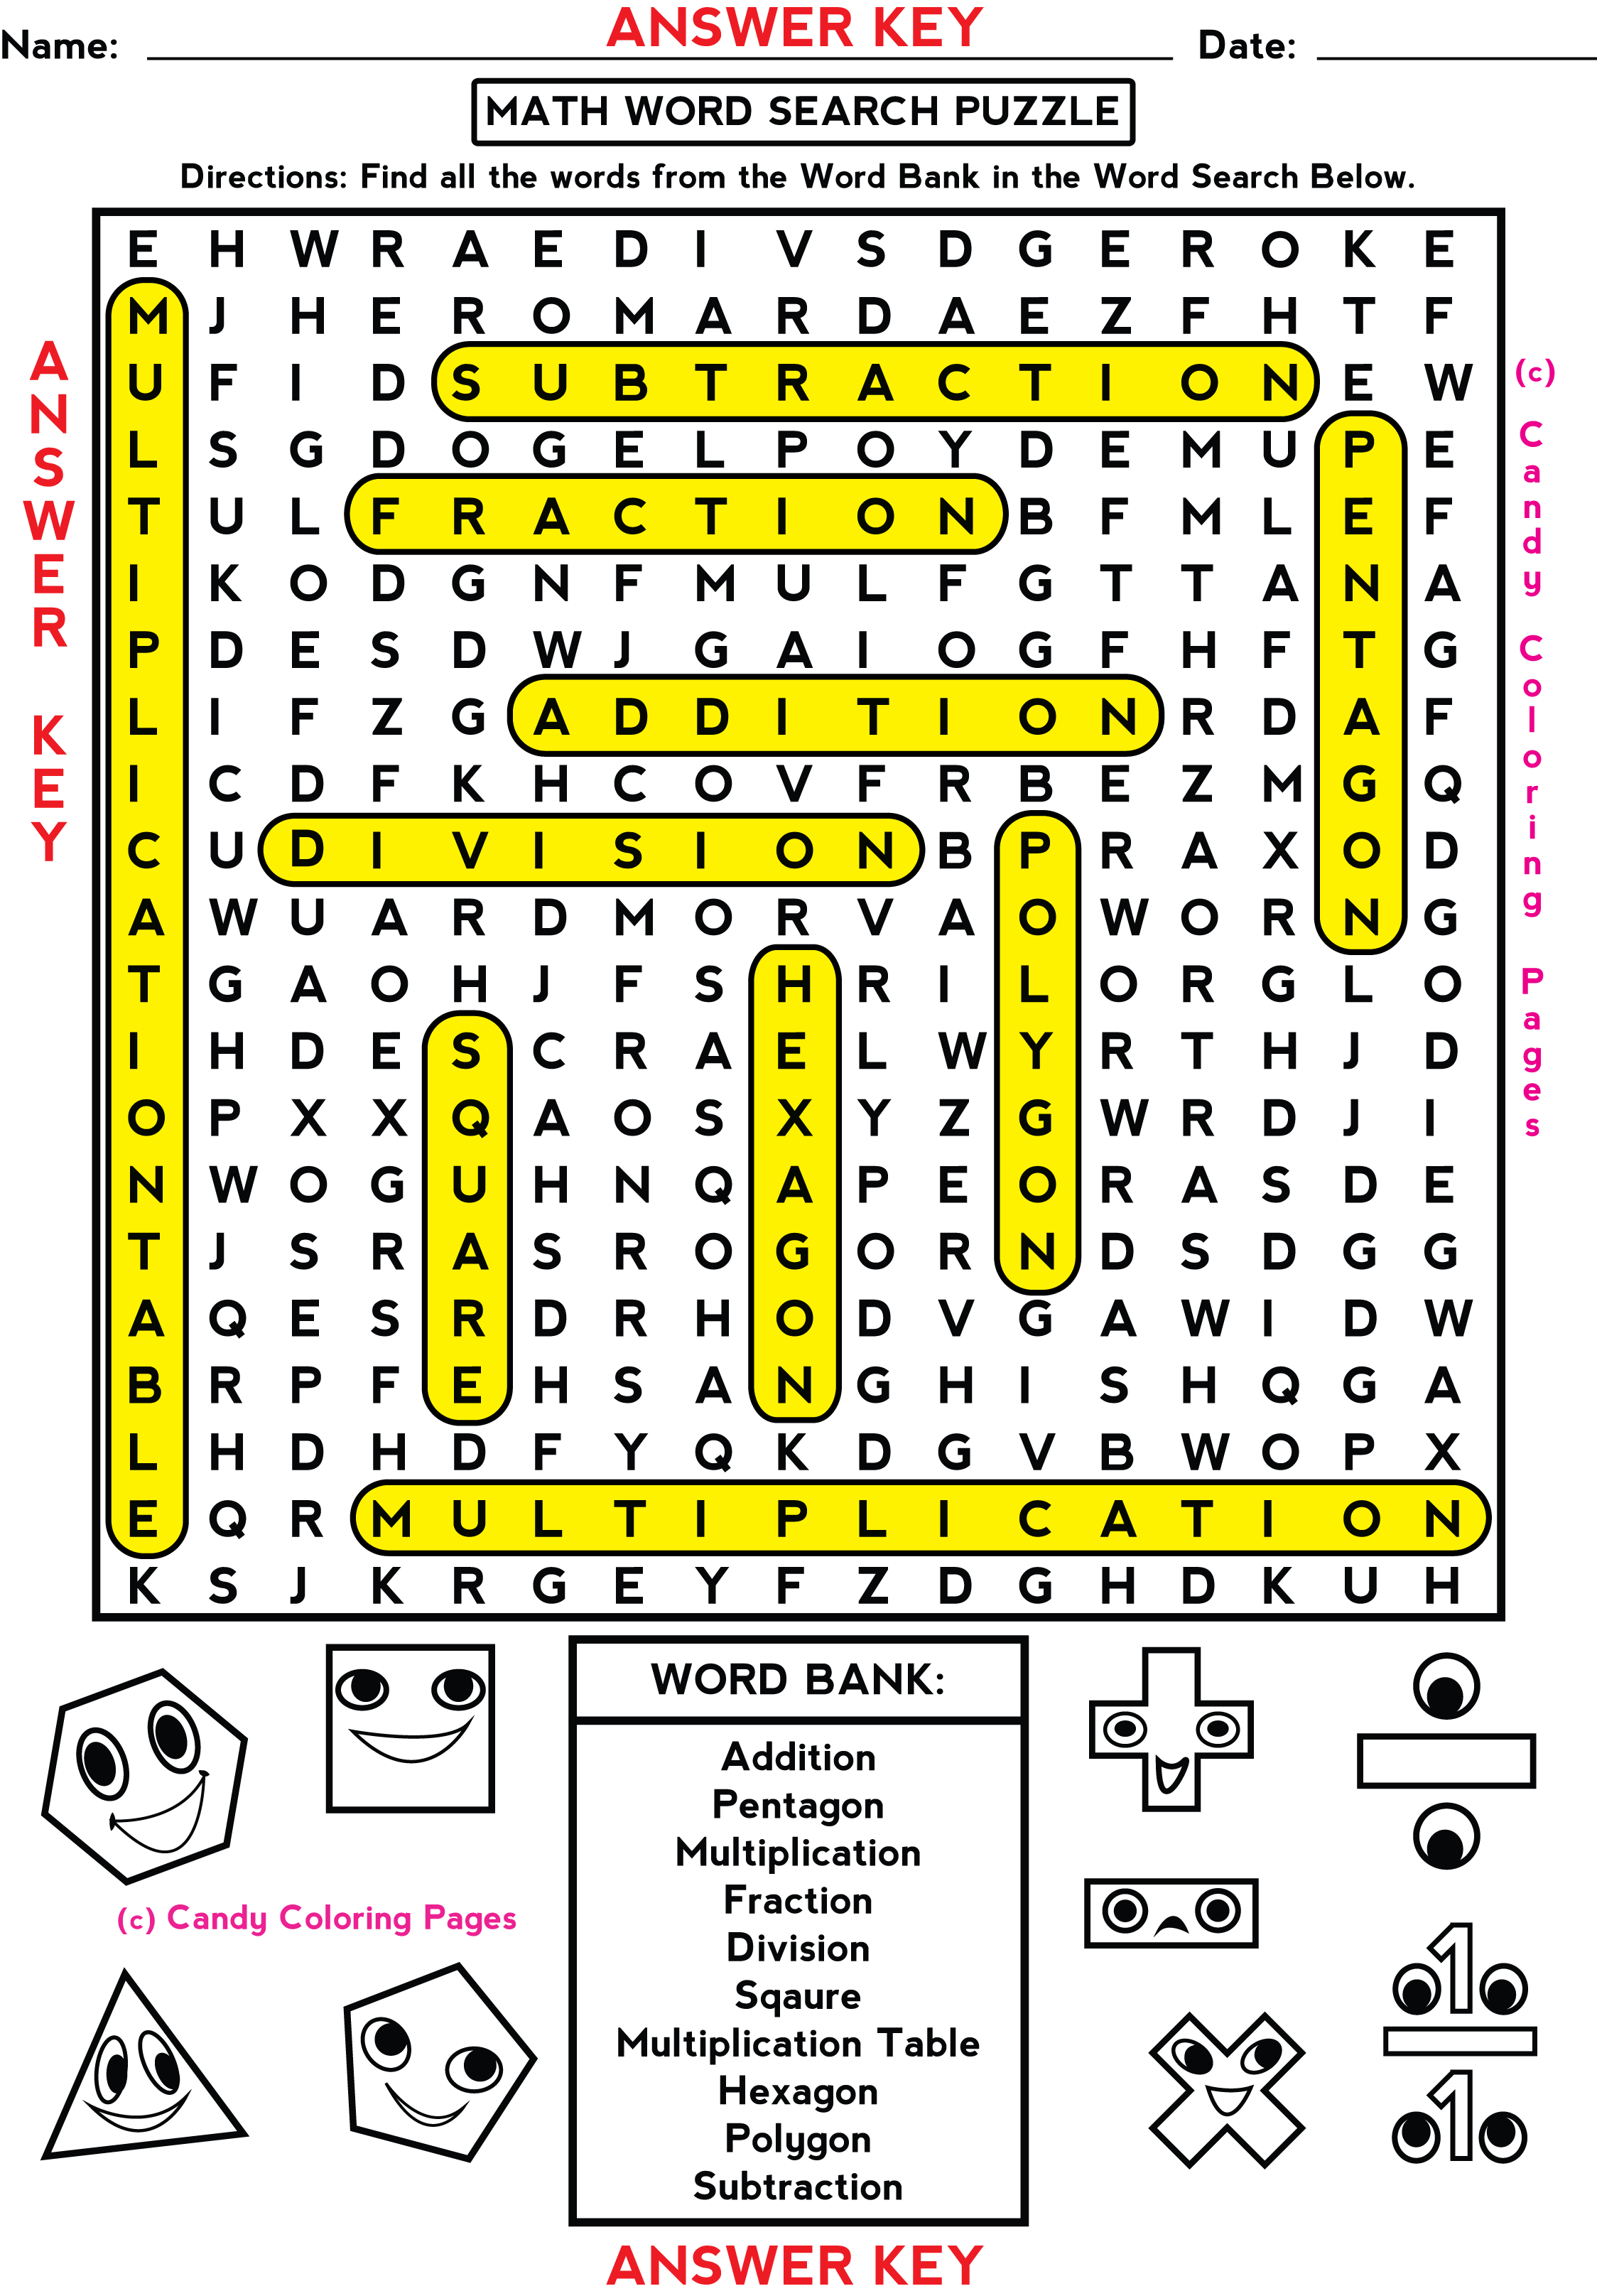 Disney Movies Word Search Puzzle | Addicted to Disney ...